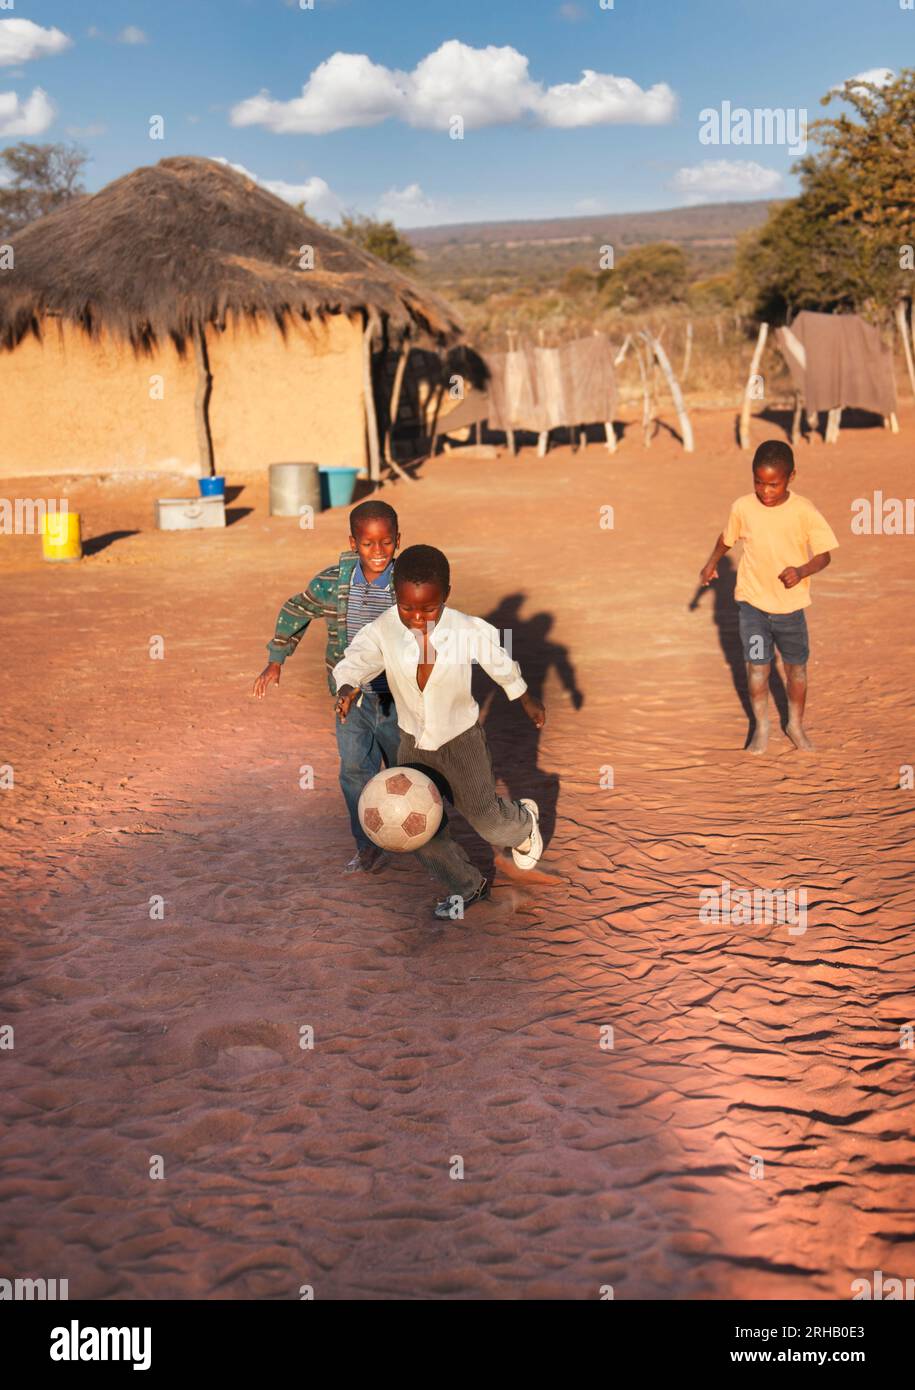 African village children playing football on the dirt in the yard Stock Photo